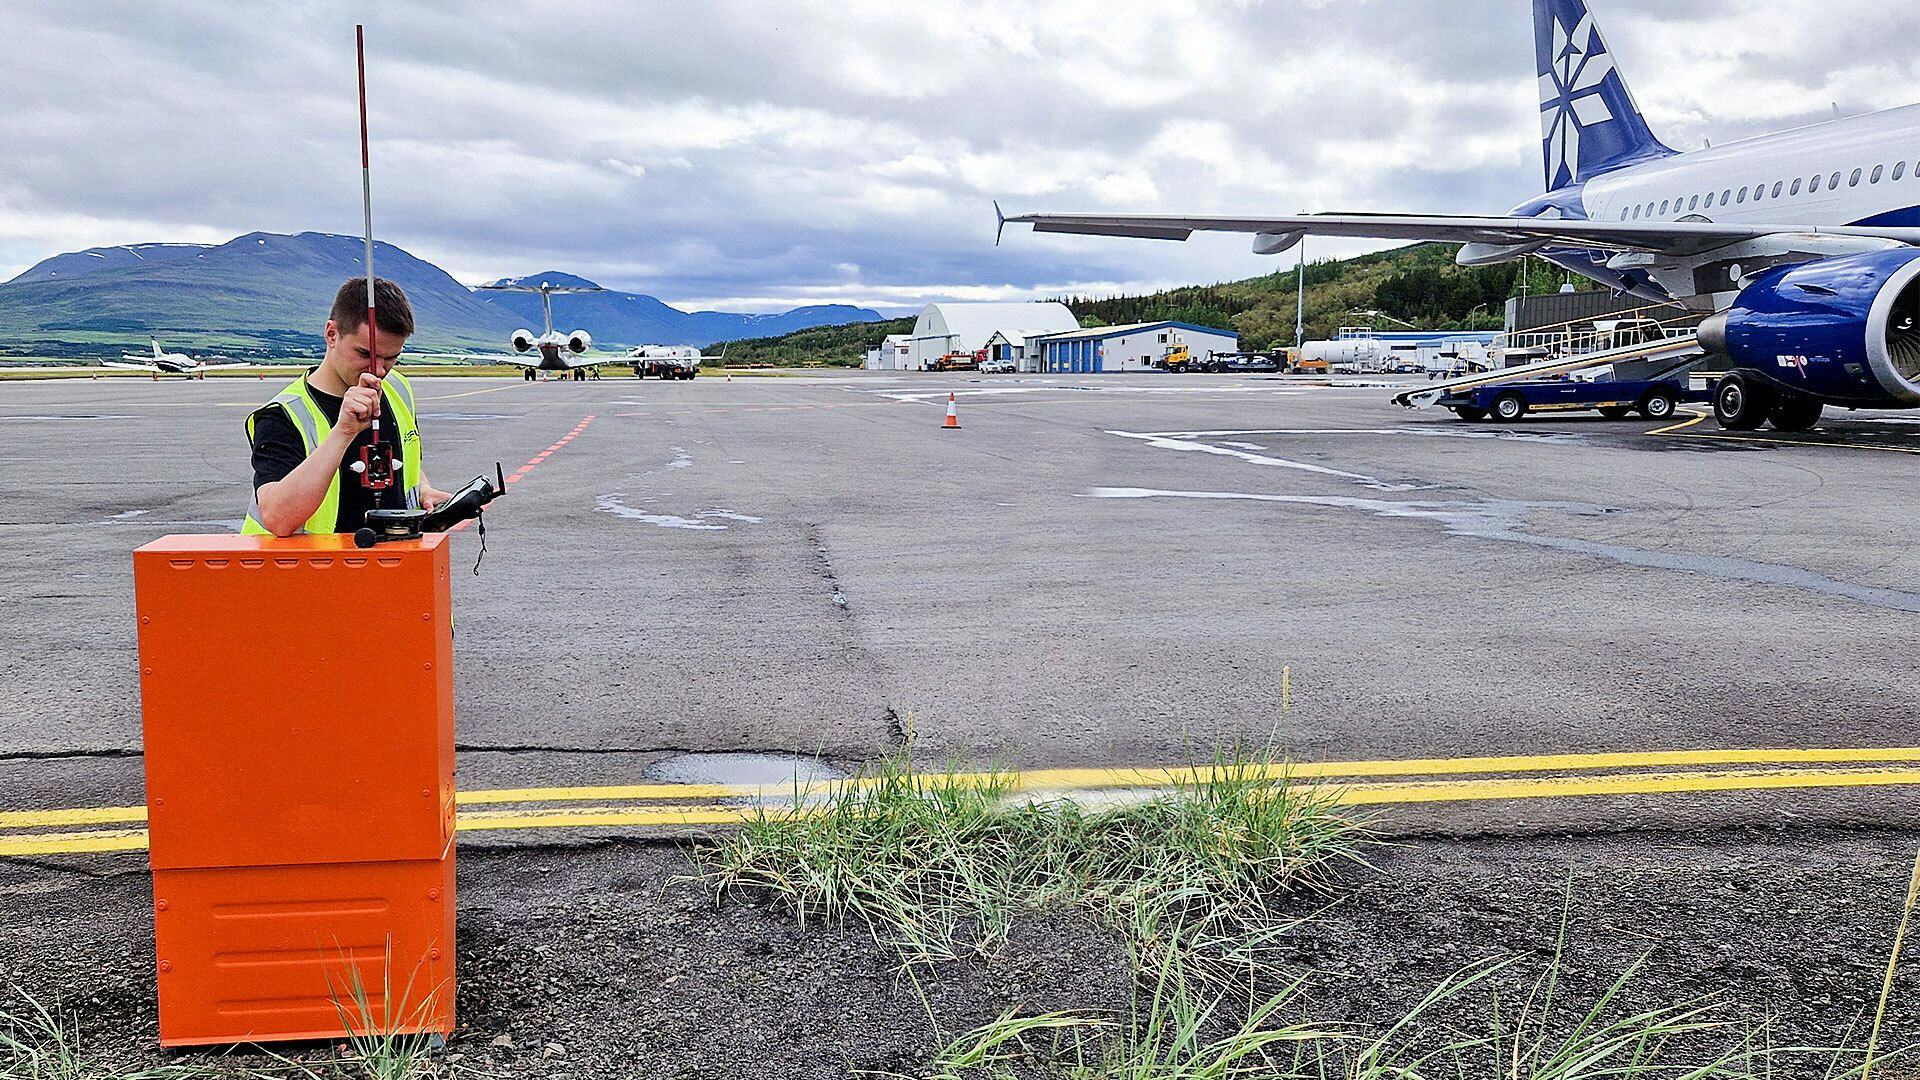 A ground crew member communicating via radio with aircraft and airport facilities in the background